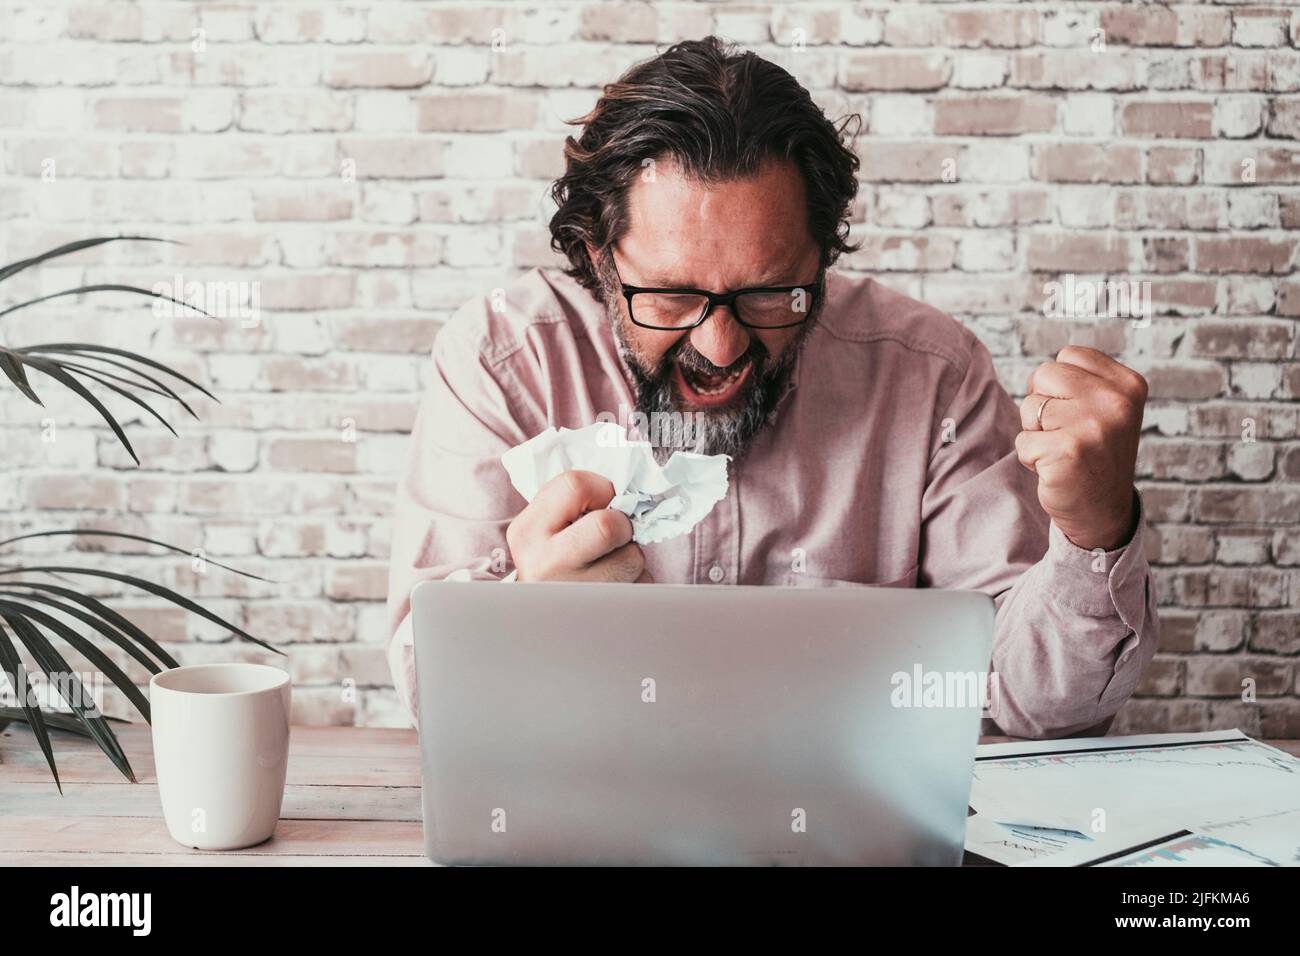 Angry man in bad expression looking a computer display with bad notifications. Adult people working on line with stress and desperation emotions. Stock Photo